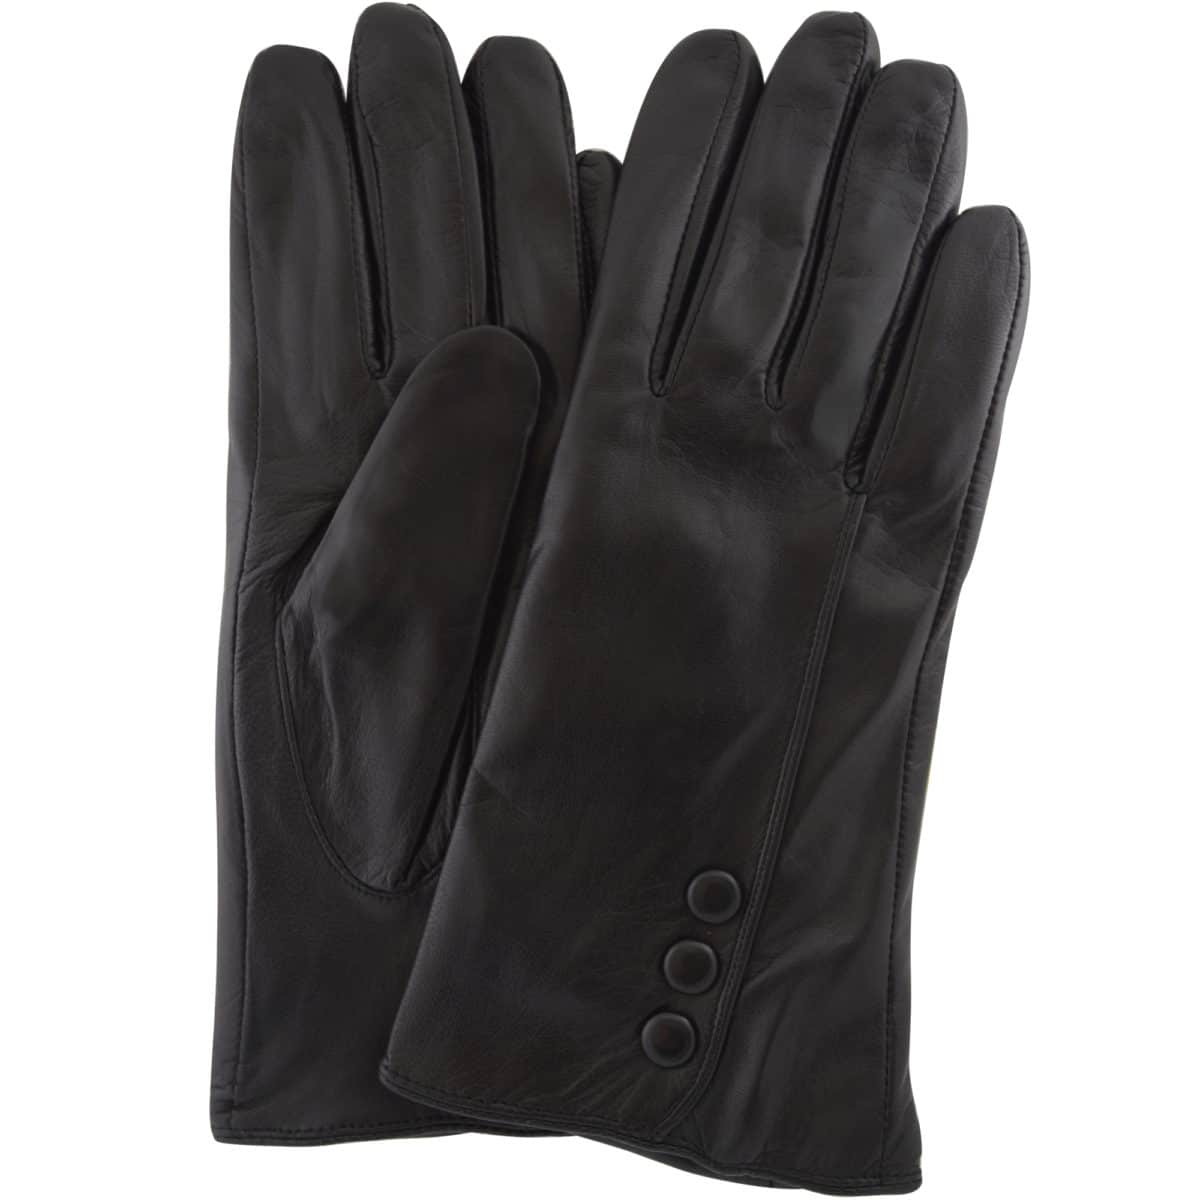 Ladies Leather Button Gloves - Fleece Lined - Black - Snugrugs